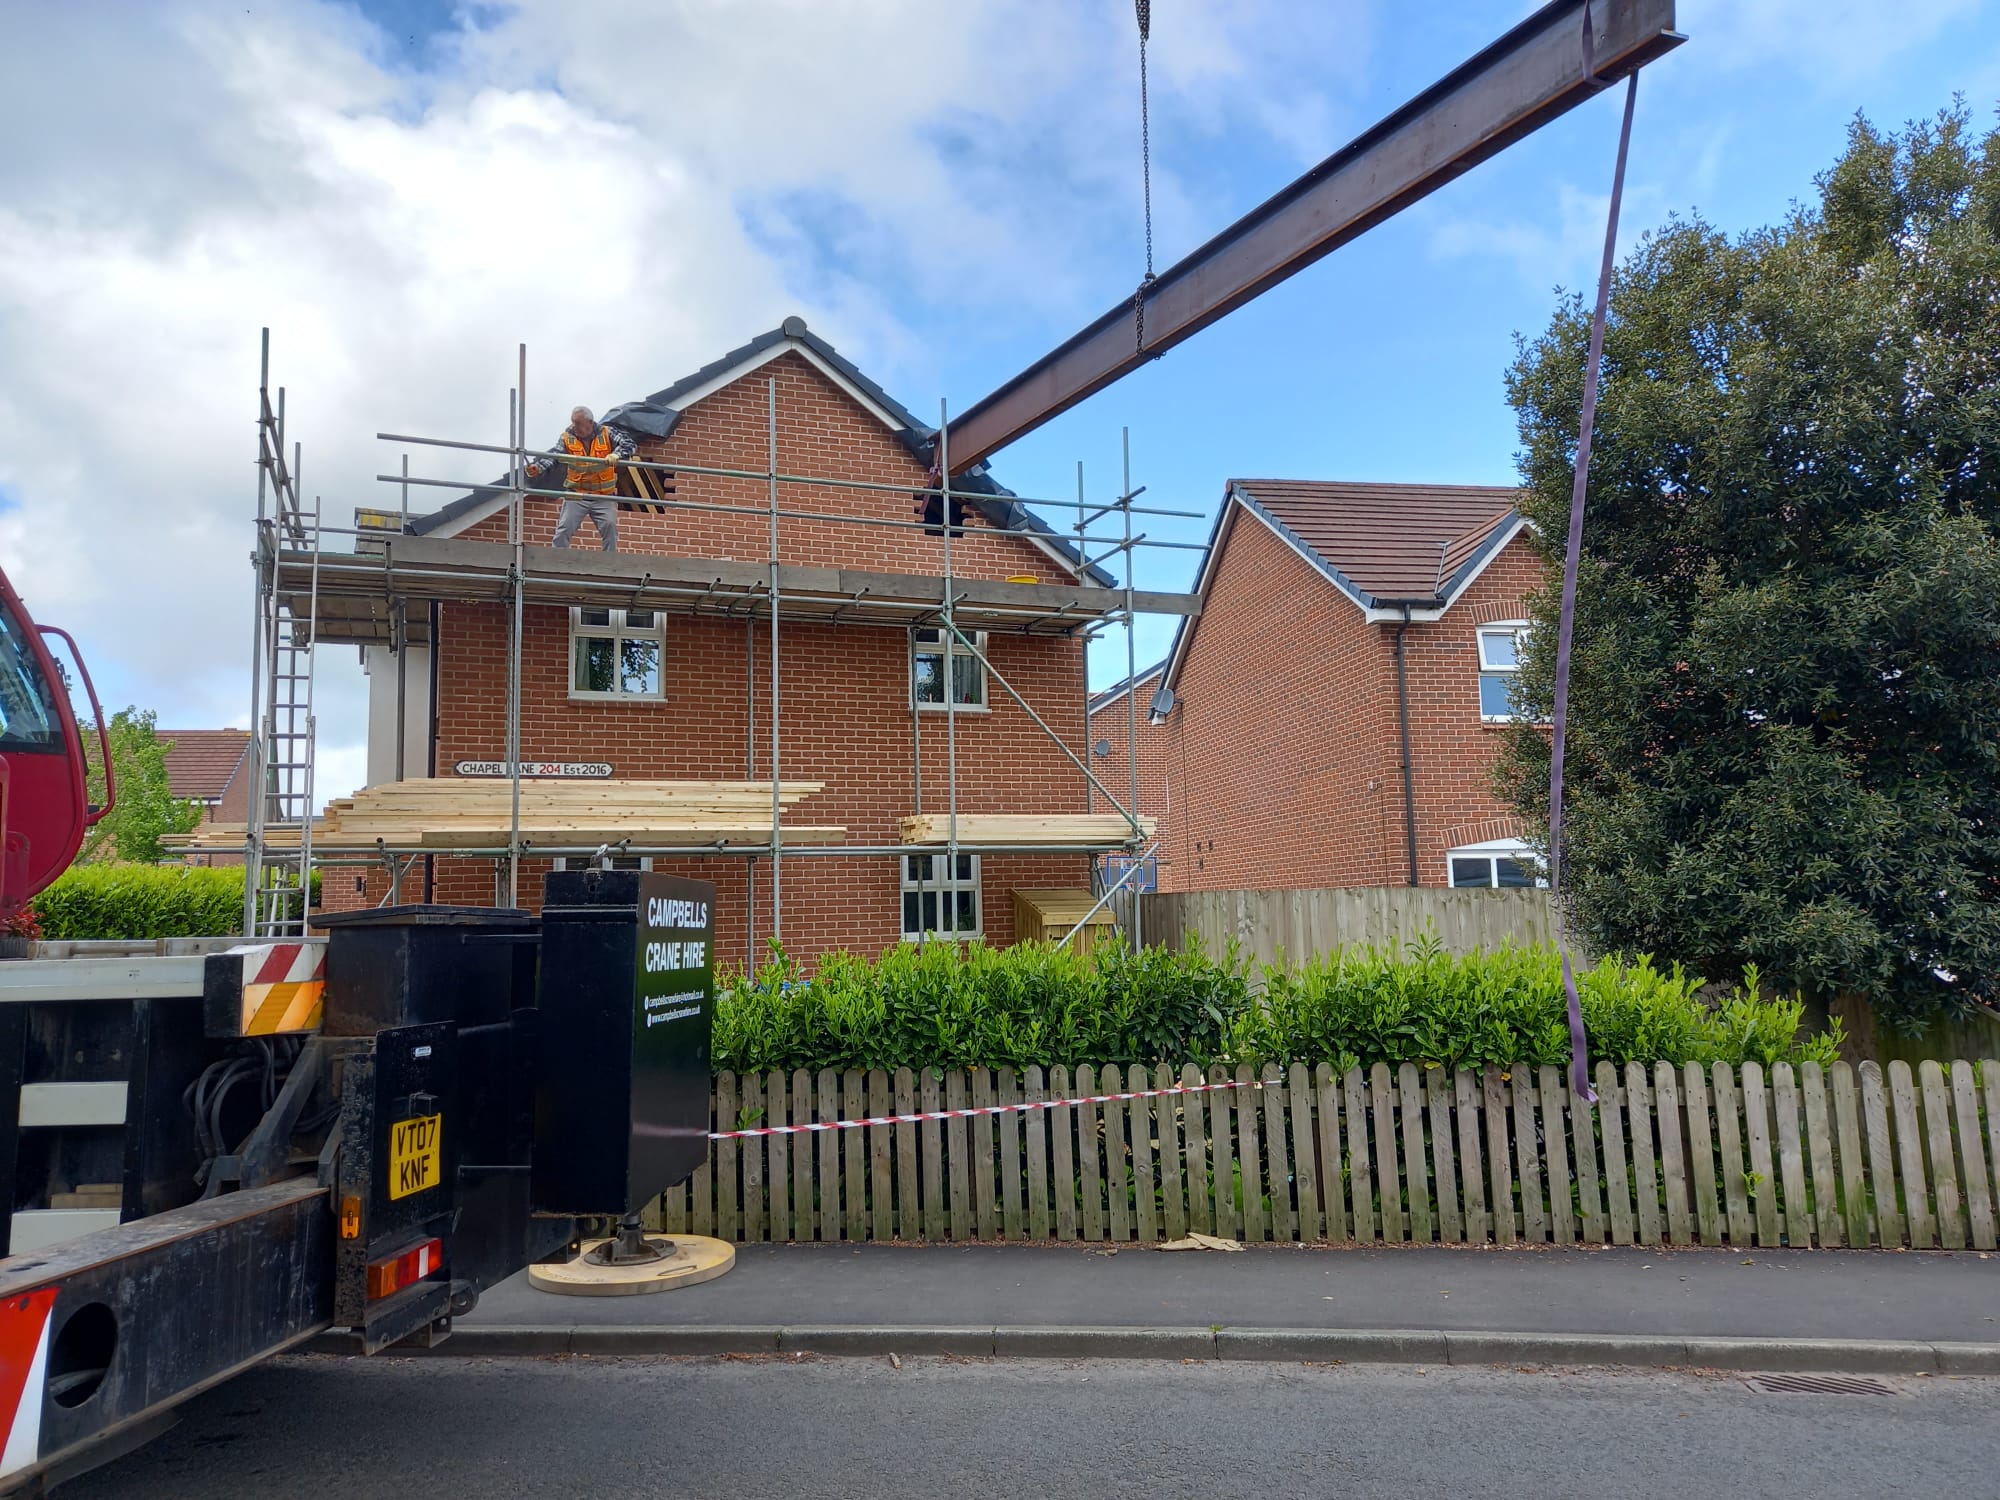 A loft conversion underway in north west uk england with steel beams being installed and built by topflite loft conversions